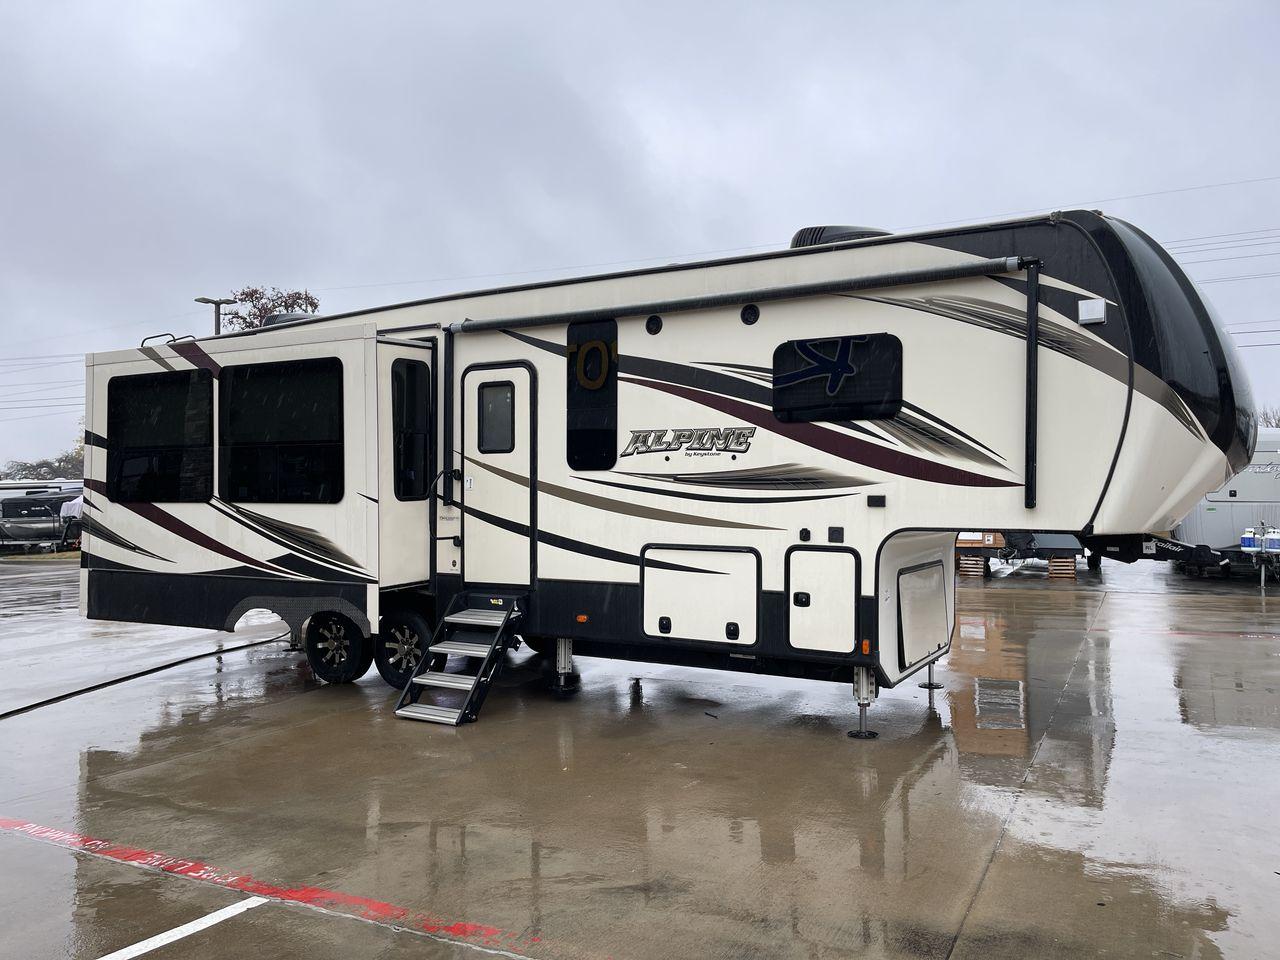 2018 KEYSTONE ALPINE 3011RE (4YDF30127JE) , Length: 34.08 ft. | Dry Weight: 11,945 lbs. | Gross Weight: 15,000 lbs. | Slides: 3 transmission, located at 4319 N Main St, Cleburne, TX, 76033, (817) 678-5133, 32.385960, -97.391212 - The definition of luxury travel comes with the 2018 Keystone Alpine 3011RE. This is an opulent fifth-wheel trailer designed for discerning adventurers. Spanning 34 feet, this exquisite model boasts three slide-outs, creating a sprawling interior that redefines comfort on the road. The master bedroom - Photo #23